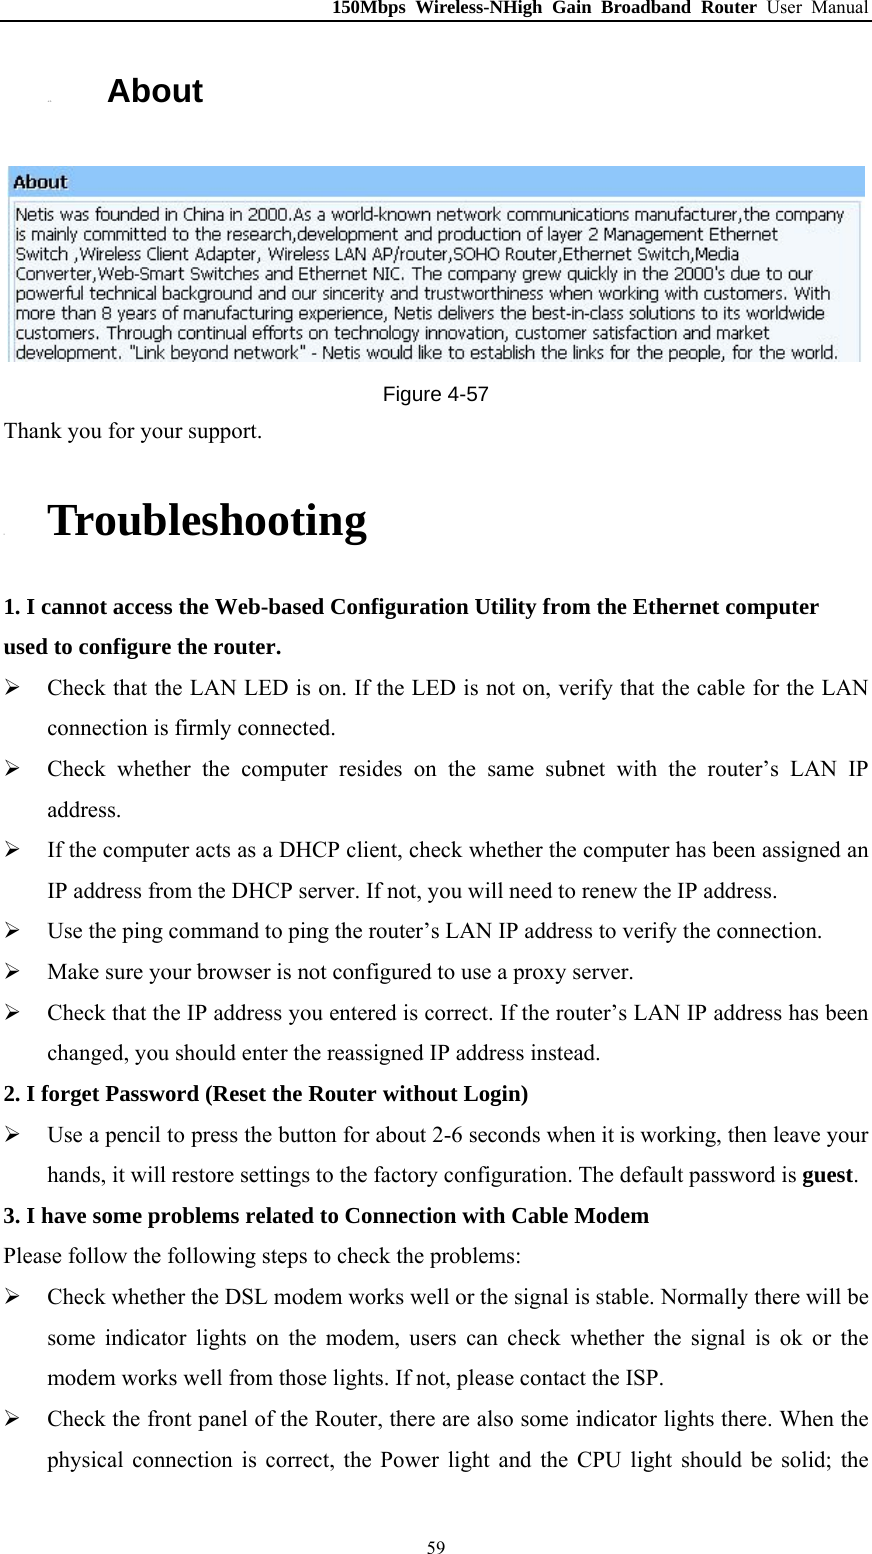 150Mbps Wireless-NHigh Gain Broadband Router User Manual 4.13. About  Figure 4-57 Thank you for your support. 5. Troubleshooting 1. I cannot access the Web-based Configuration Utility from the Ethernet computer used to configure the router.  Check that the LAN LED is on. If the LED is not on, verify that the cable for the LAN connection is firmly connected.  Check whether the computer resides on the same subnet with the router’s LAN IP address.  If the computer acts as a DHCP client, check whether the computer has been assigned an IP address from the DHCP server. If not, you will need to renew the IP address.    Use the ping command to ping the router’s LAN IP address to verify the connection.  Make sure your browser is not configured to use a proxy server.  Check that the IP address you entered is correct. If the router’s LAN IP address has been changed, you should enter the reassigned IP address instead. 2. I forget Password (Reset the Router without Login)  Use a pencil to press the button for about 2-6 seconds when it is working, then leave your hands, it will restore settings to the factory configuration. The default password is guest. 3. I have some problems related to Connection with Cable Modem Please follow the following steps to check the problems:  Check whether the DSL modem works well or the signal is stable. Normally there will be some indicator lights on the modem, users can check whether the signal is ok or the modem works well from those lights. If not, please contact the ISP.  Check the front panel of the Router, there are also some indicator lights there. When the physical connection is correct, the Power light and the CPU light should be solid; the  59